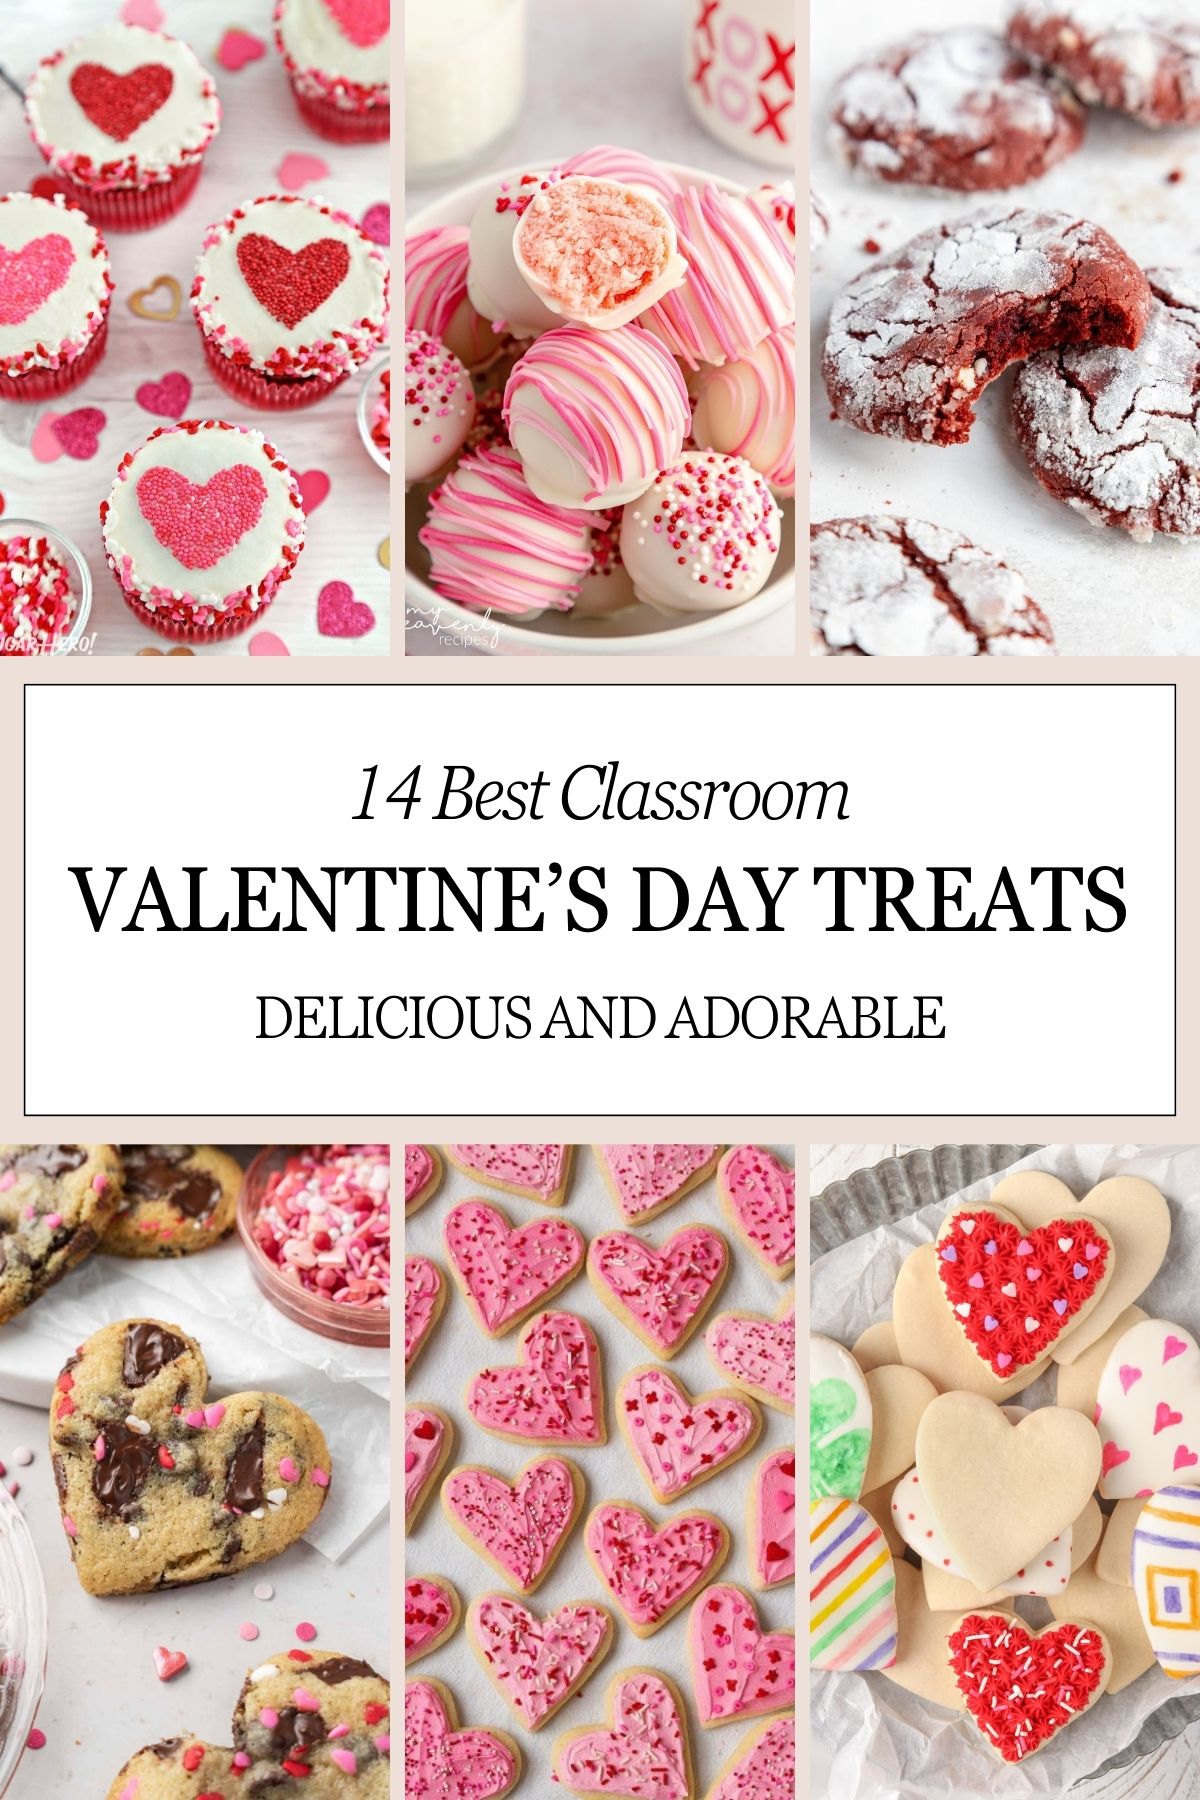 Collage of valentines day treats perfect for classroom parties. Cookies, cupcakes, cake pops.